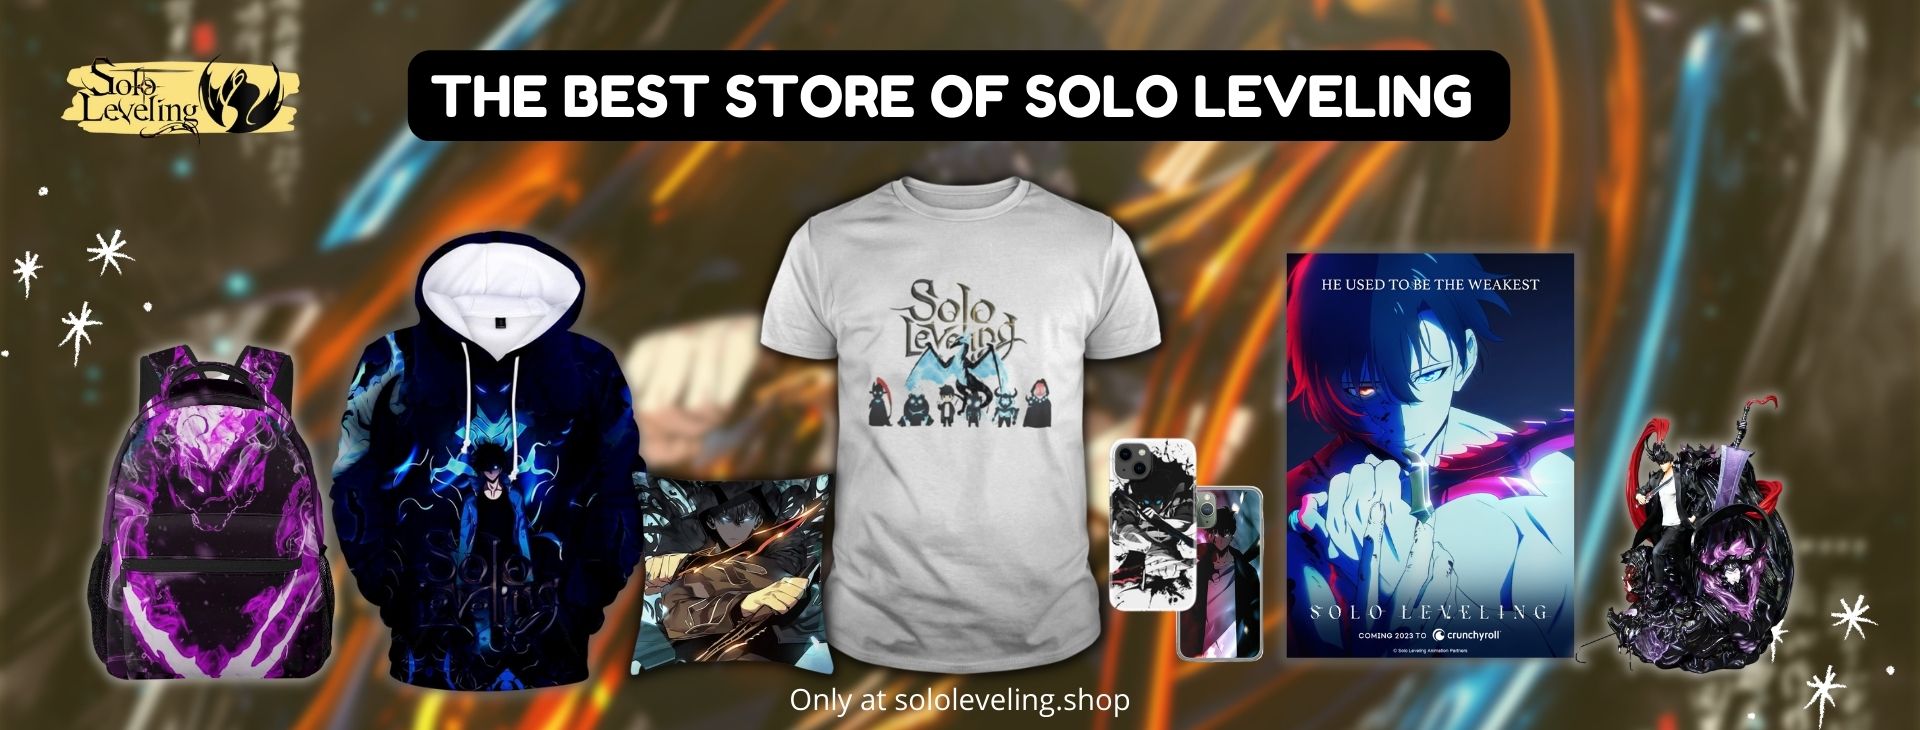 Solo Leveling Banner - Solo Leveling Merch